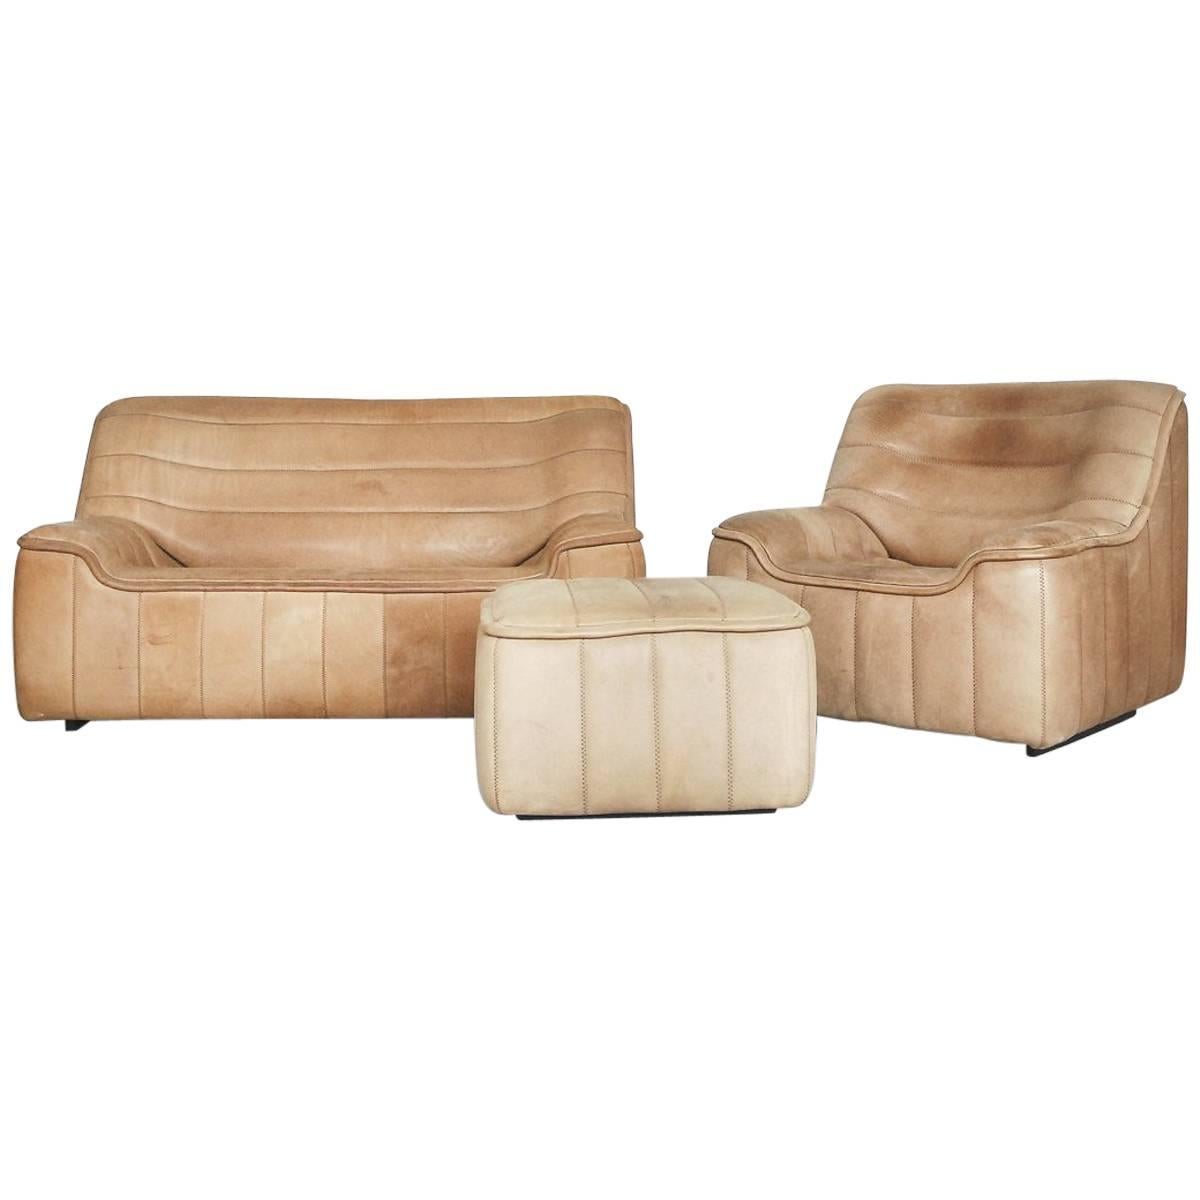 Swiss De Sede DS-84 Leather Living Room Set, Sofa, Armchair and Ottoman, 1970s